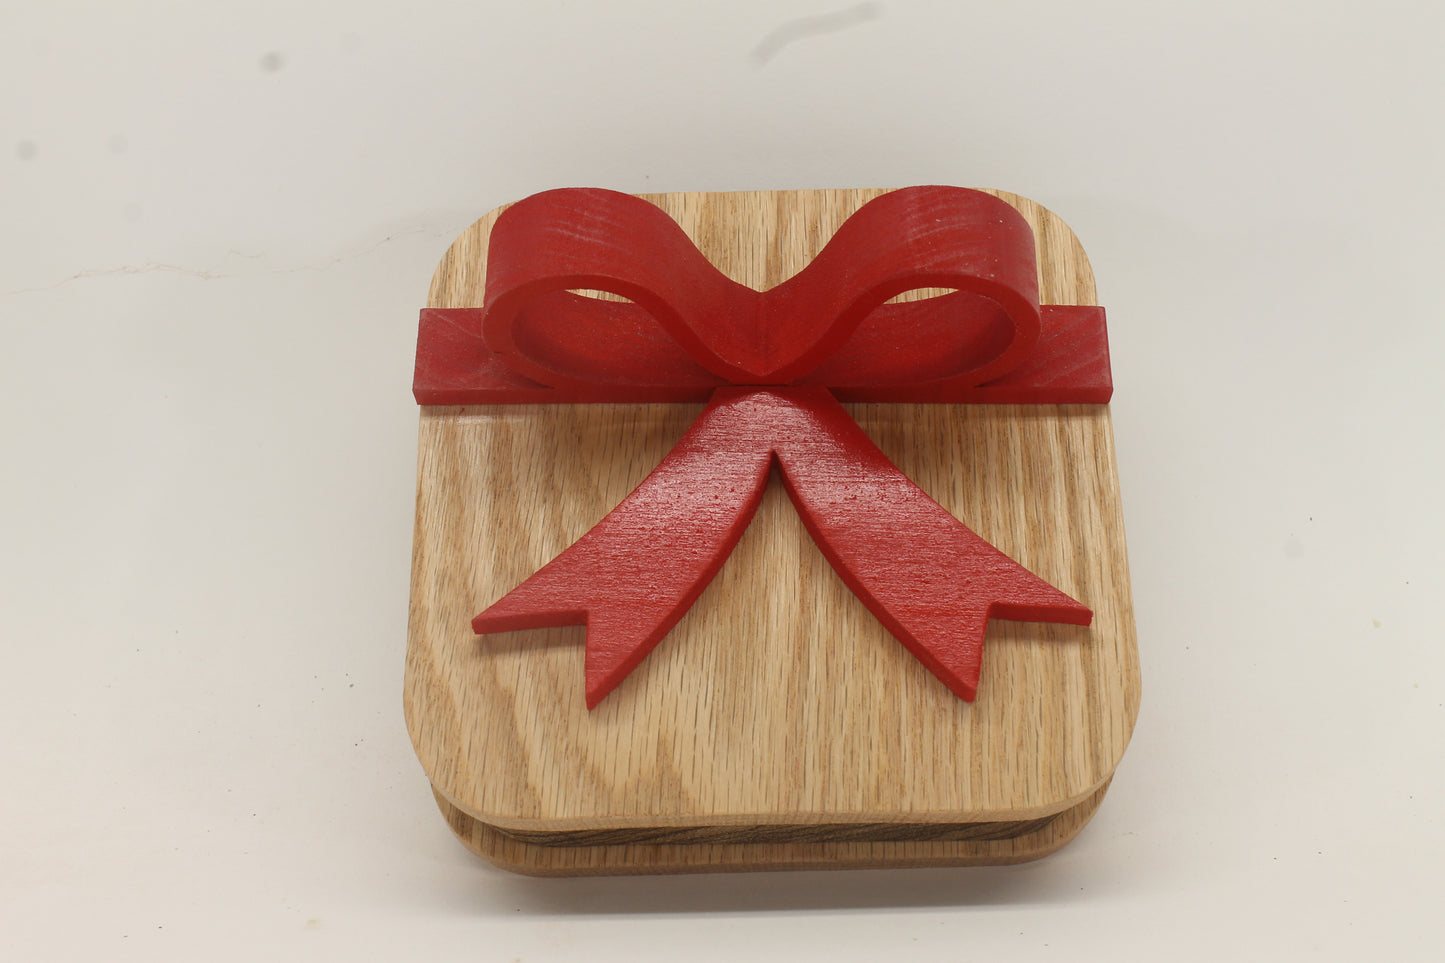 Wooden gift box with red wooden bow